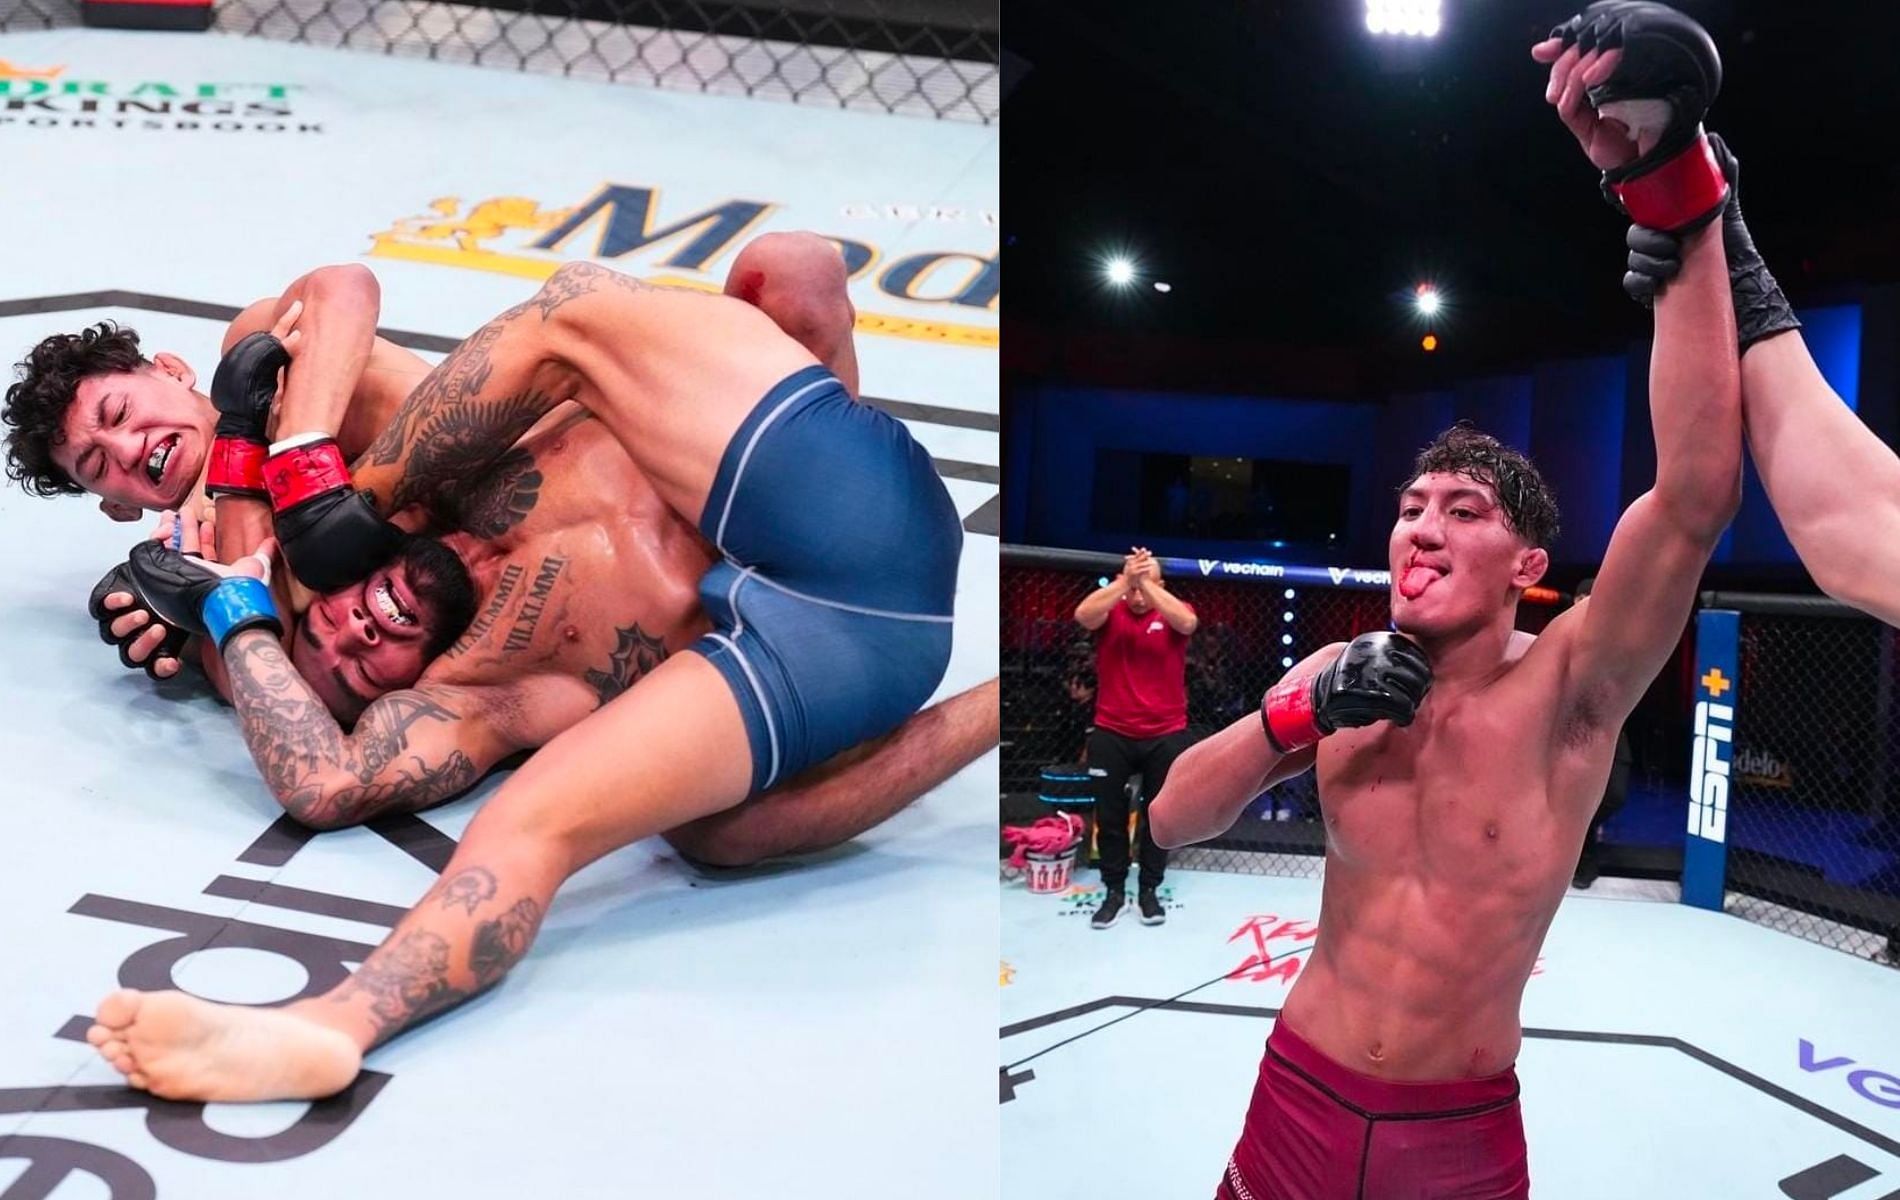 Raul Rosas Jr. in action at DWCS(Left), Raul Rosas Jr. after his victory(Right), (Images via Instagram: @ufc)